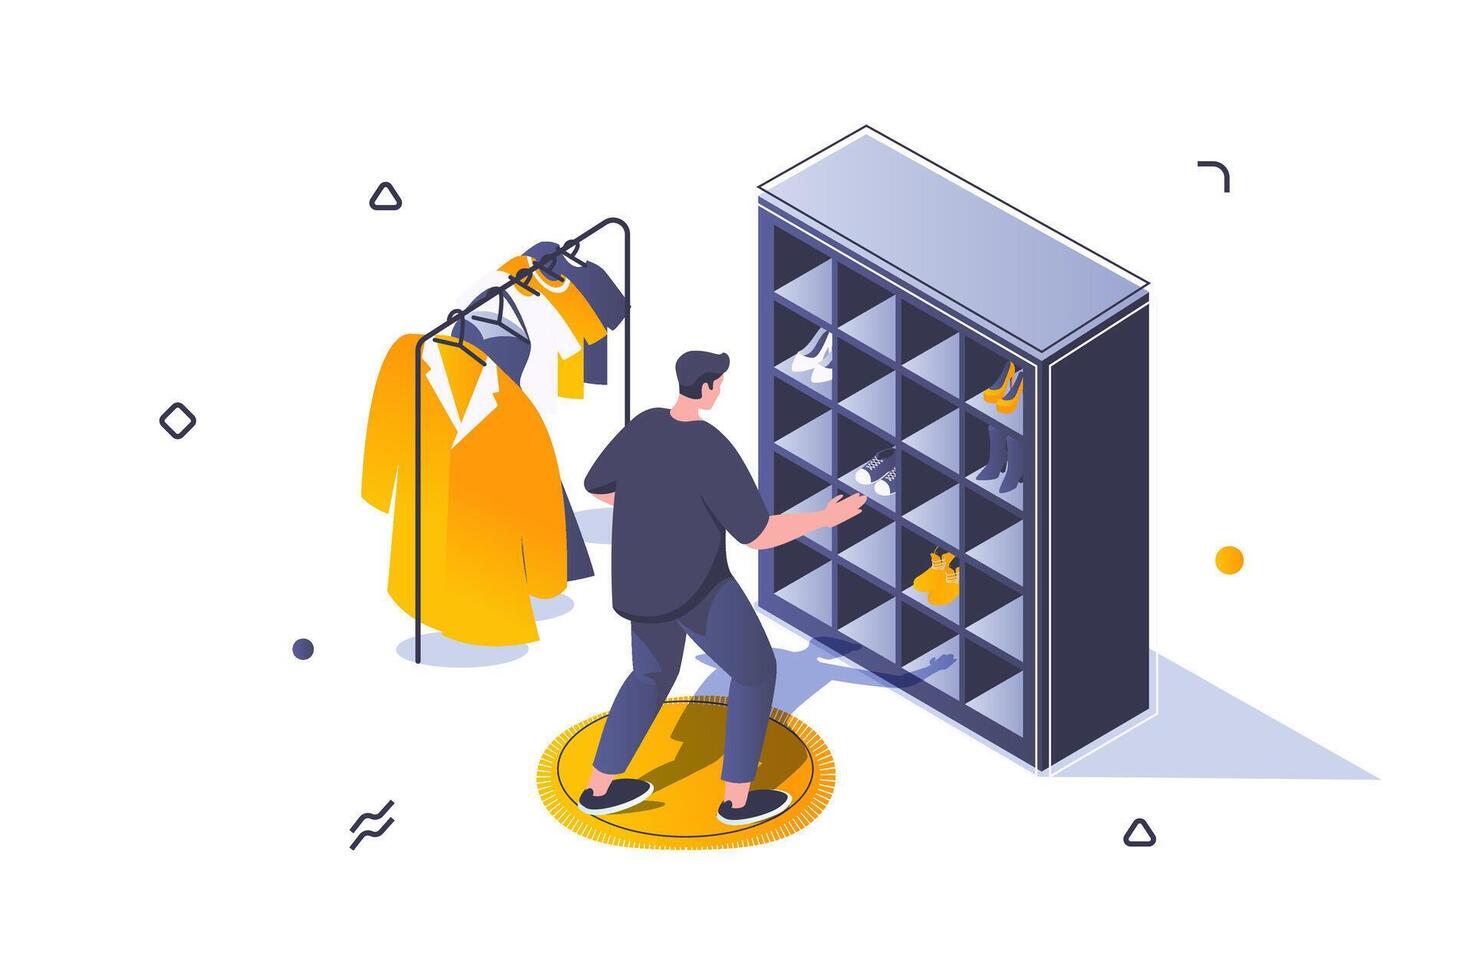 Home interior concept in 3d isometric design. Man stands at closet near clothes hangers rack. Furnishing and decoration in living room. Vector illustration with isometric people scene for web graphic